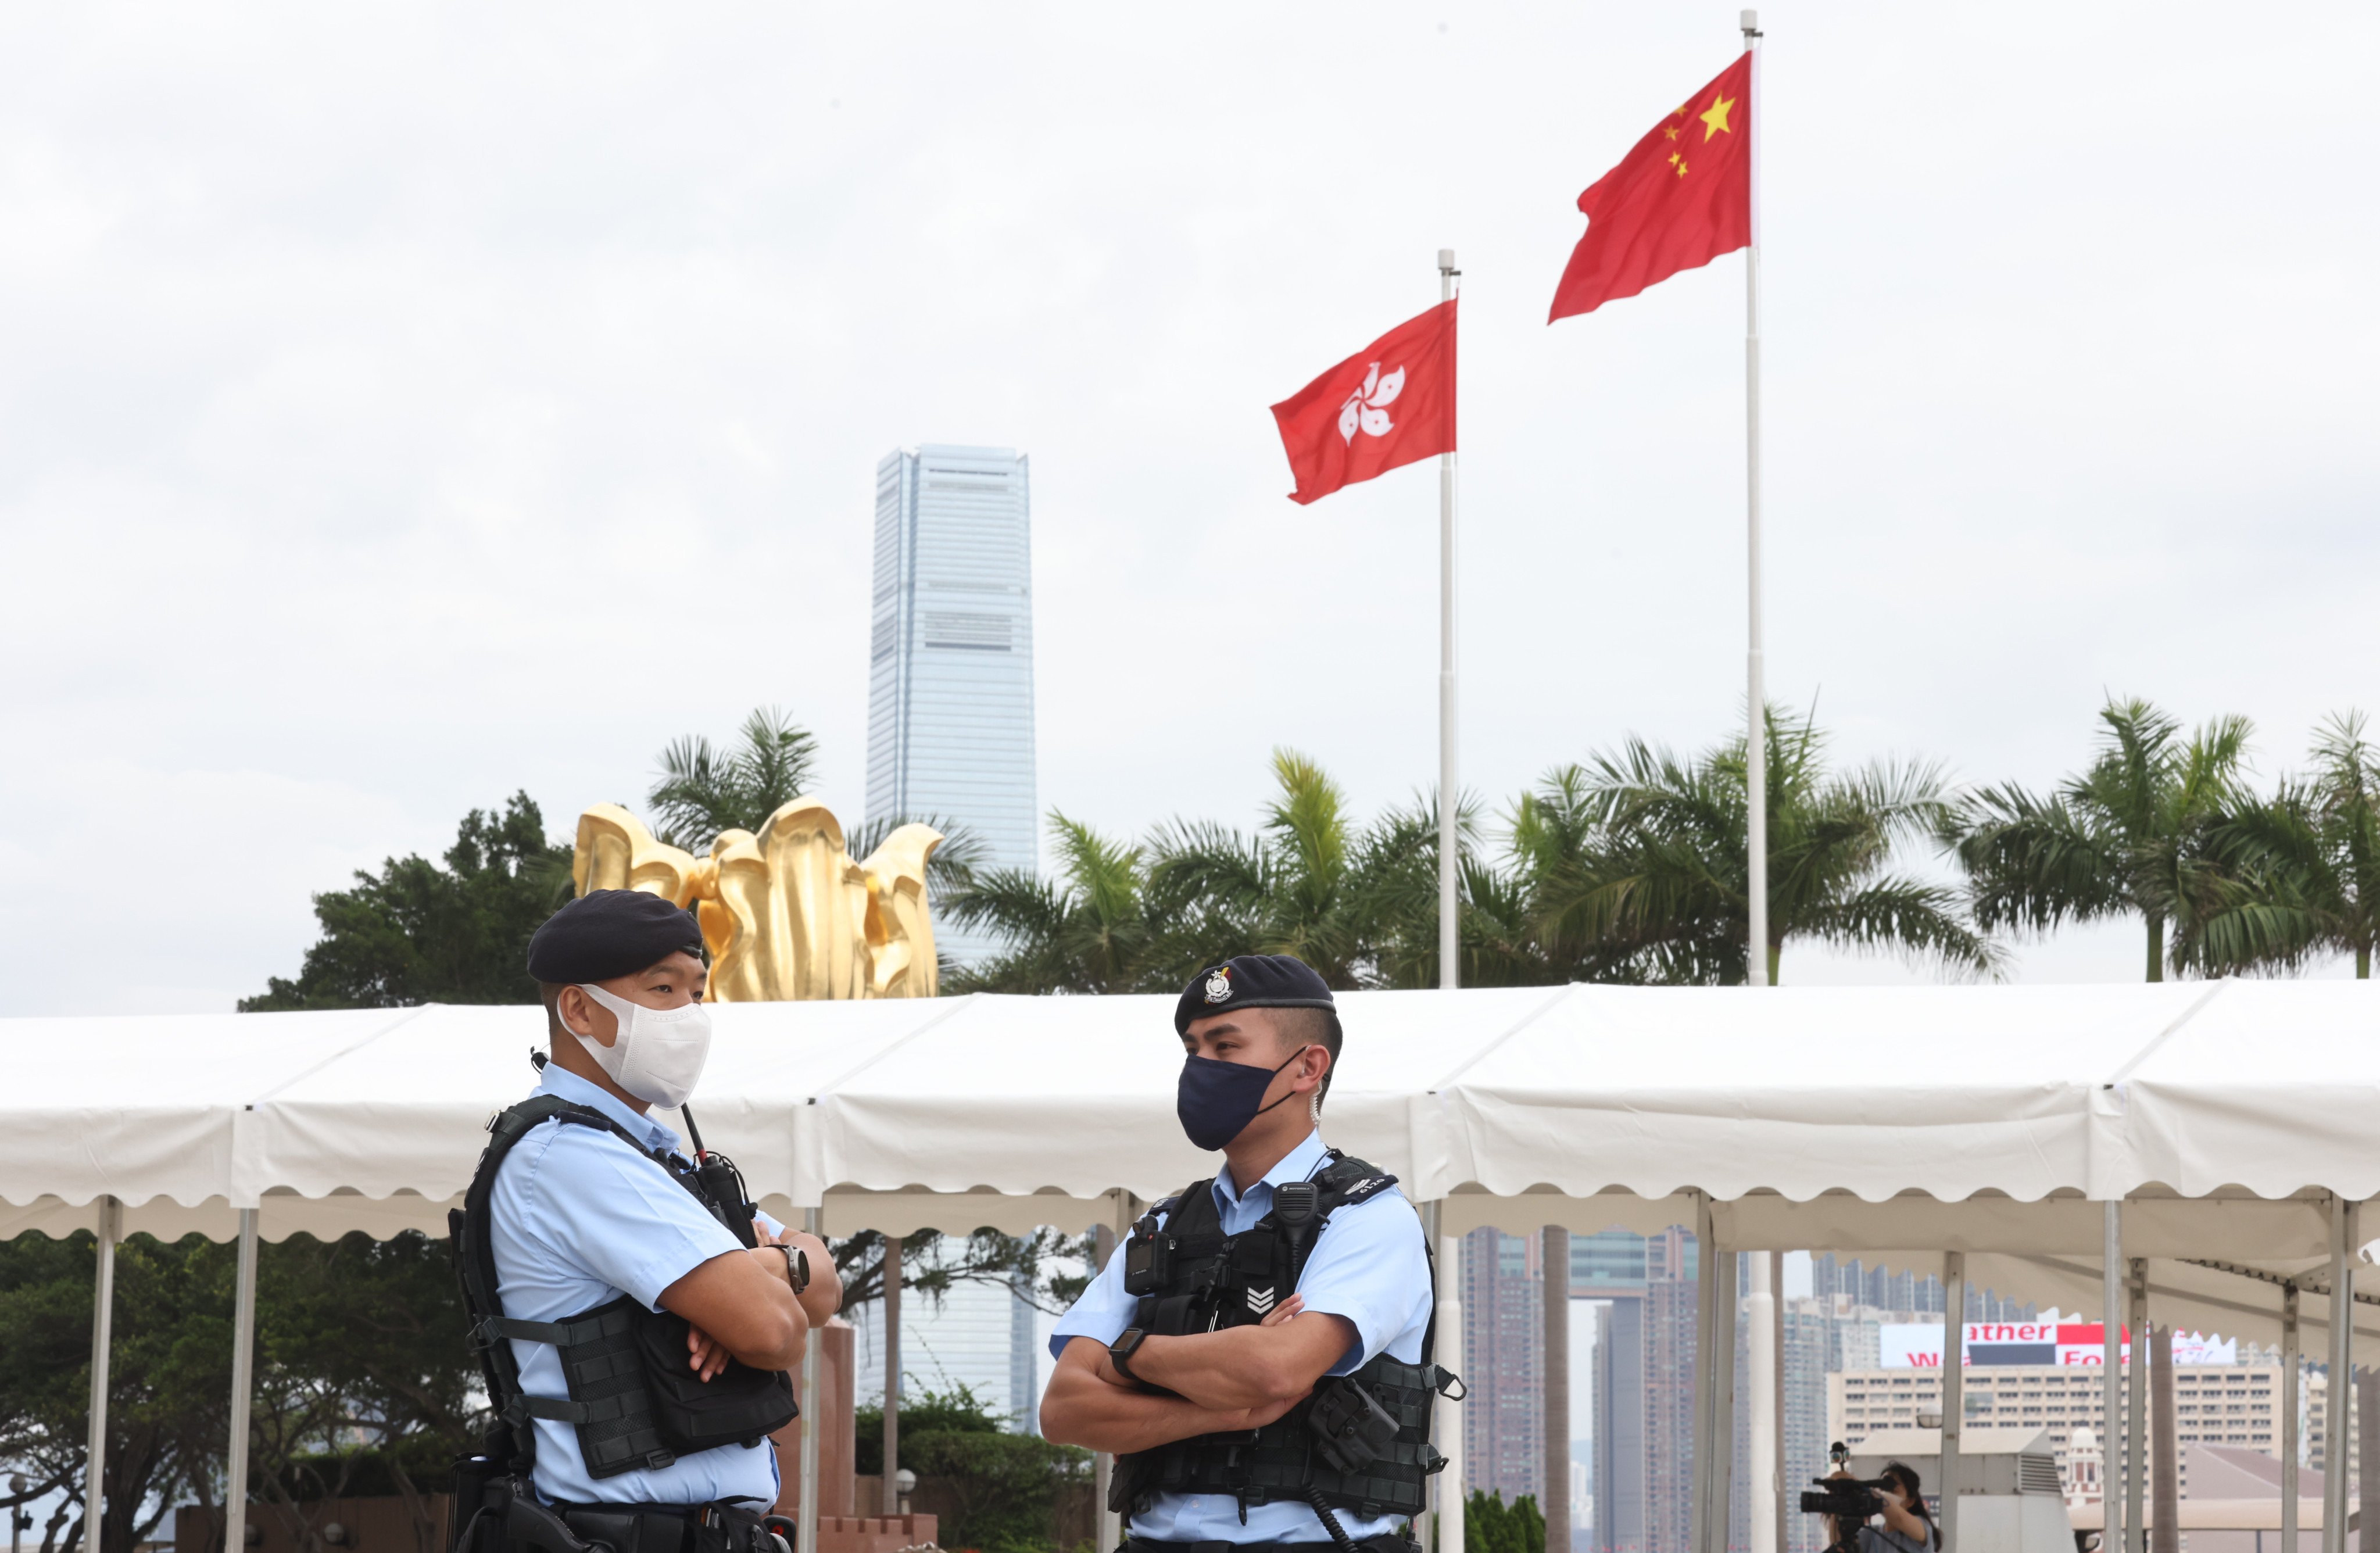 Hong Kong’s police force will be mobilized in its entirety to protect the state leader and his entourage during a potential visit on the 25th anniversary of the city’s return to Chinese rule. Photo: K. Y. Cheng